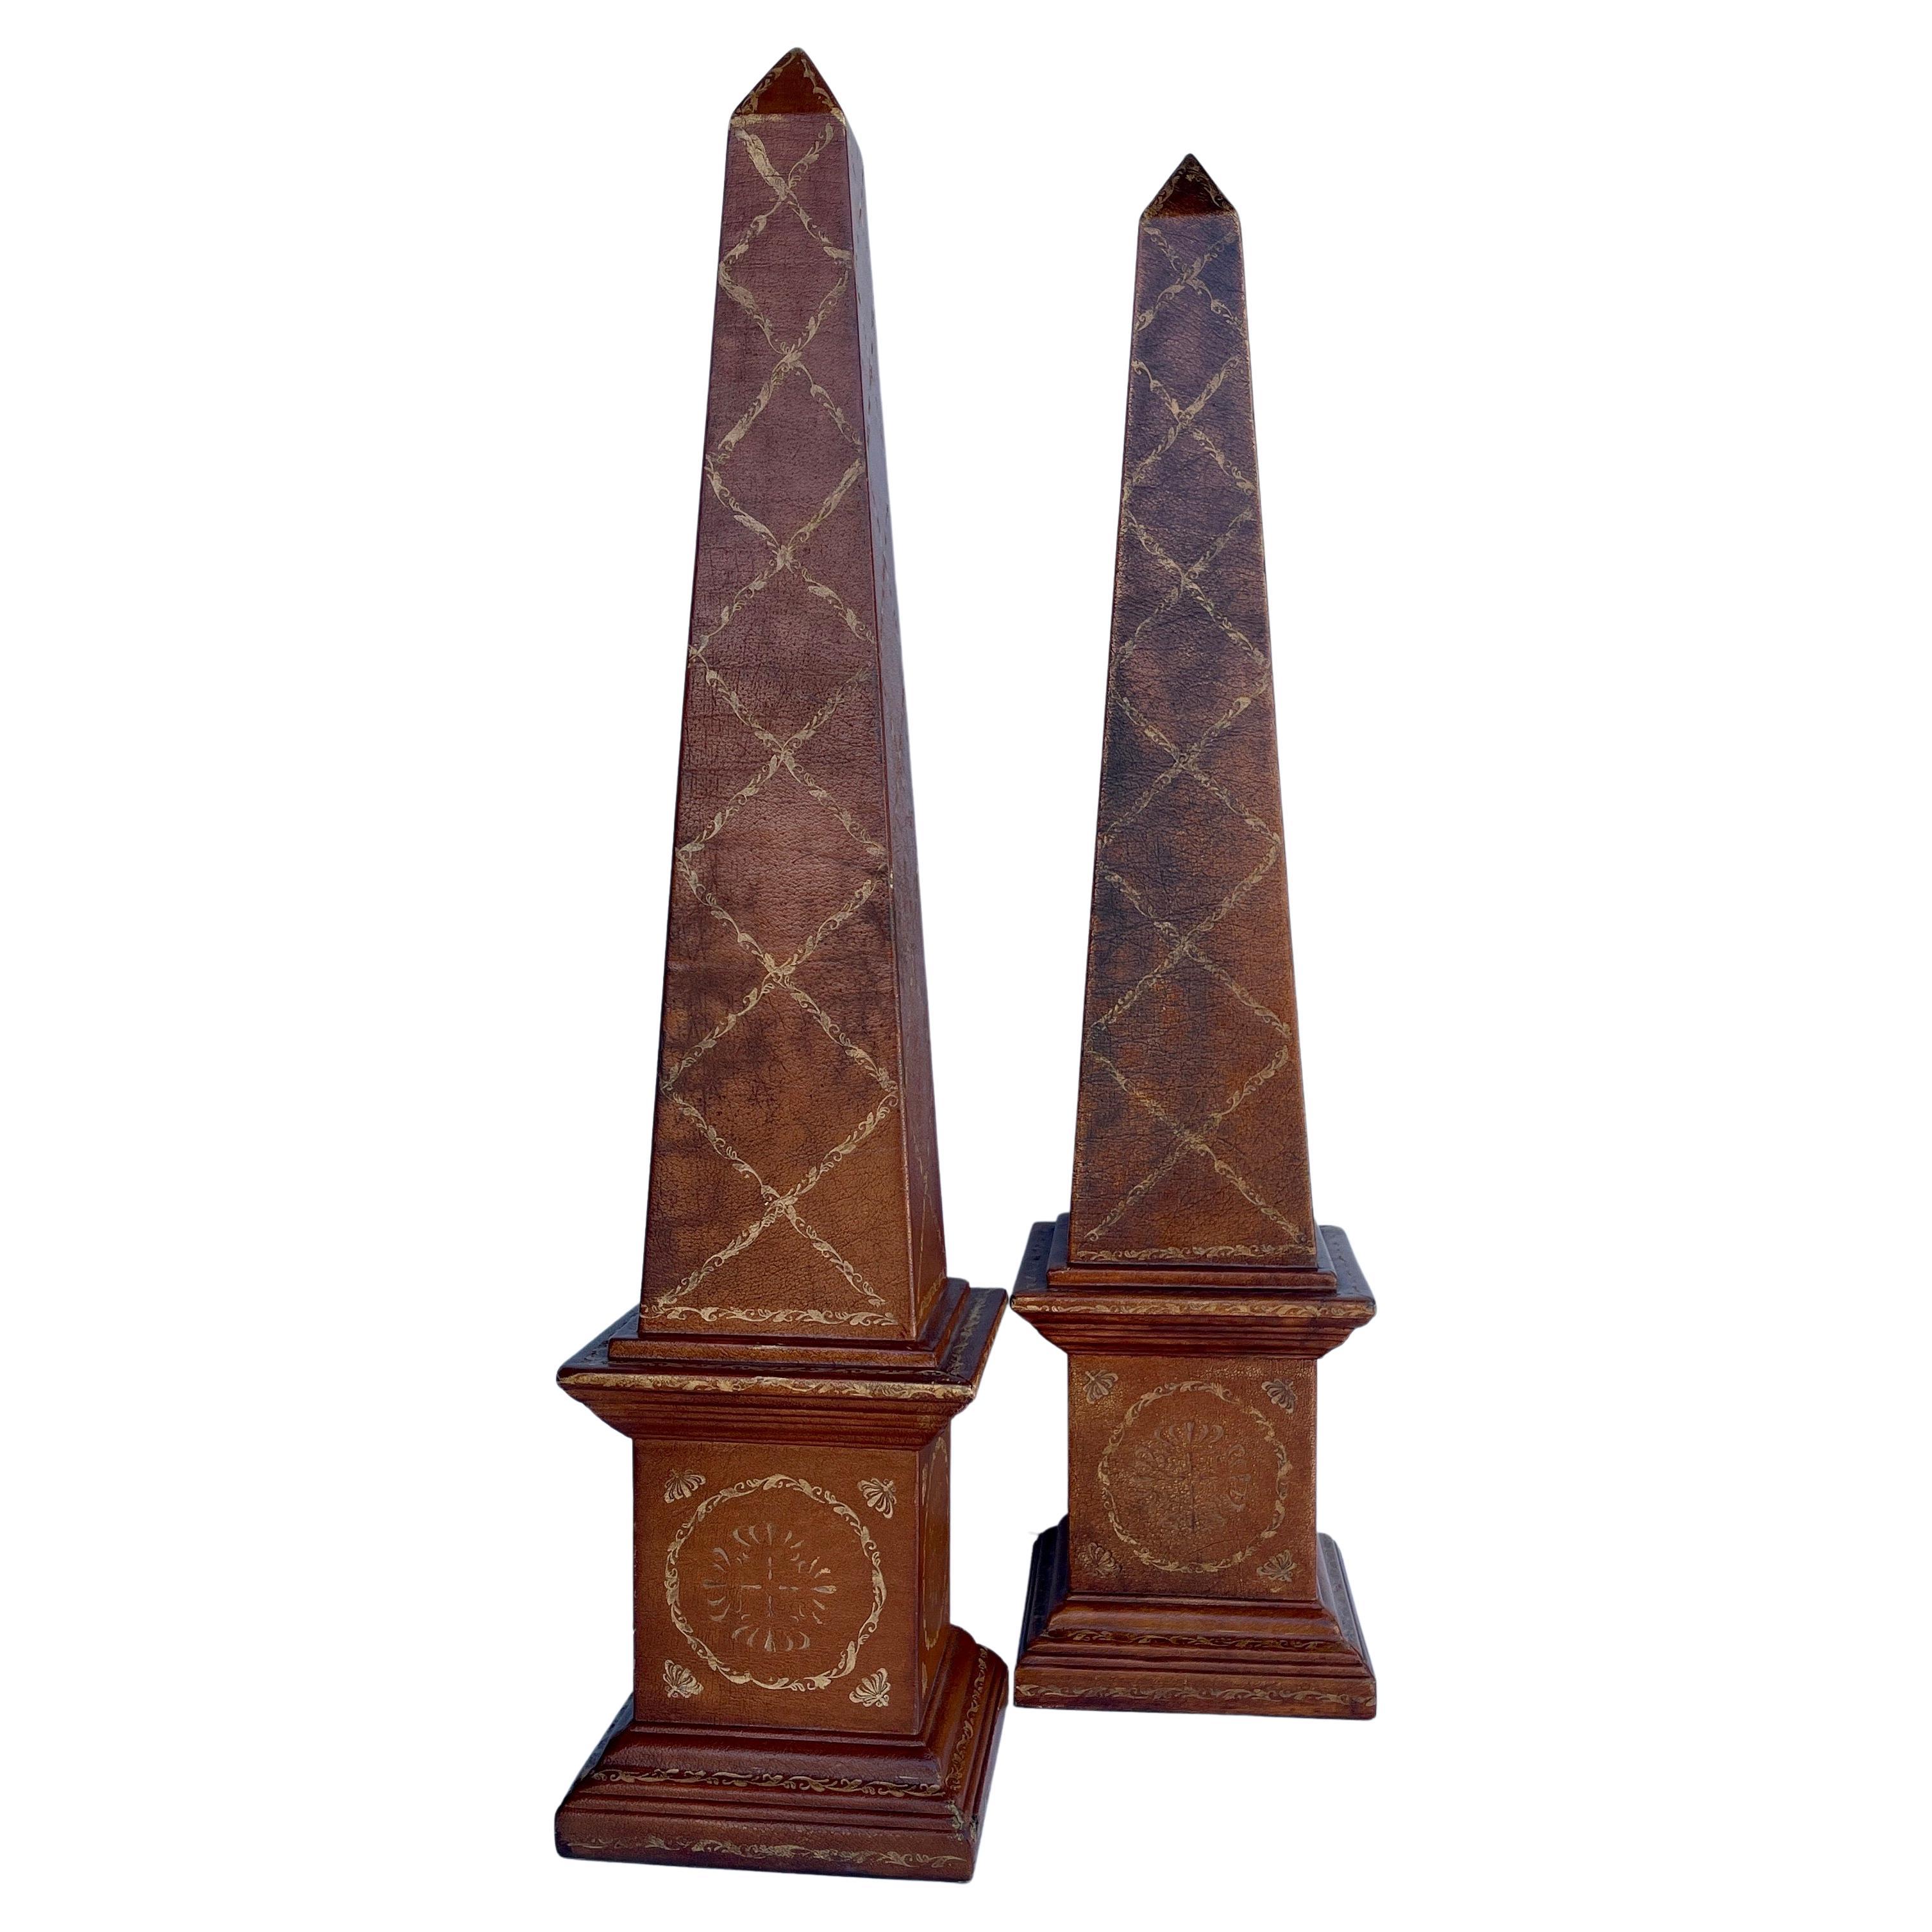 Large Theodore Alexander Pair Brown Embossed Leather Obelisks

A fantastic pair of designer obelisks. This pair is beautifully embossed in classic brown leather. Theodore Alexander is one of the finest luxury brands in the world. Founded in 1996 by